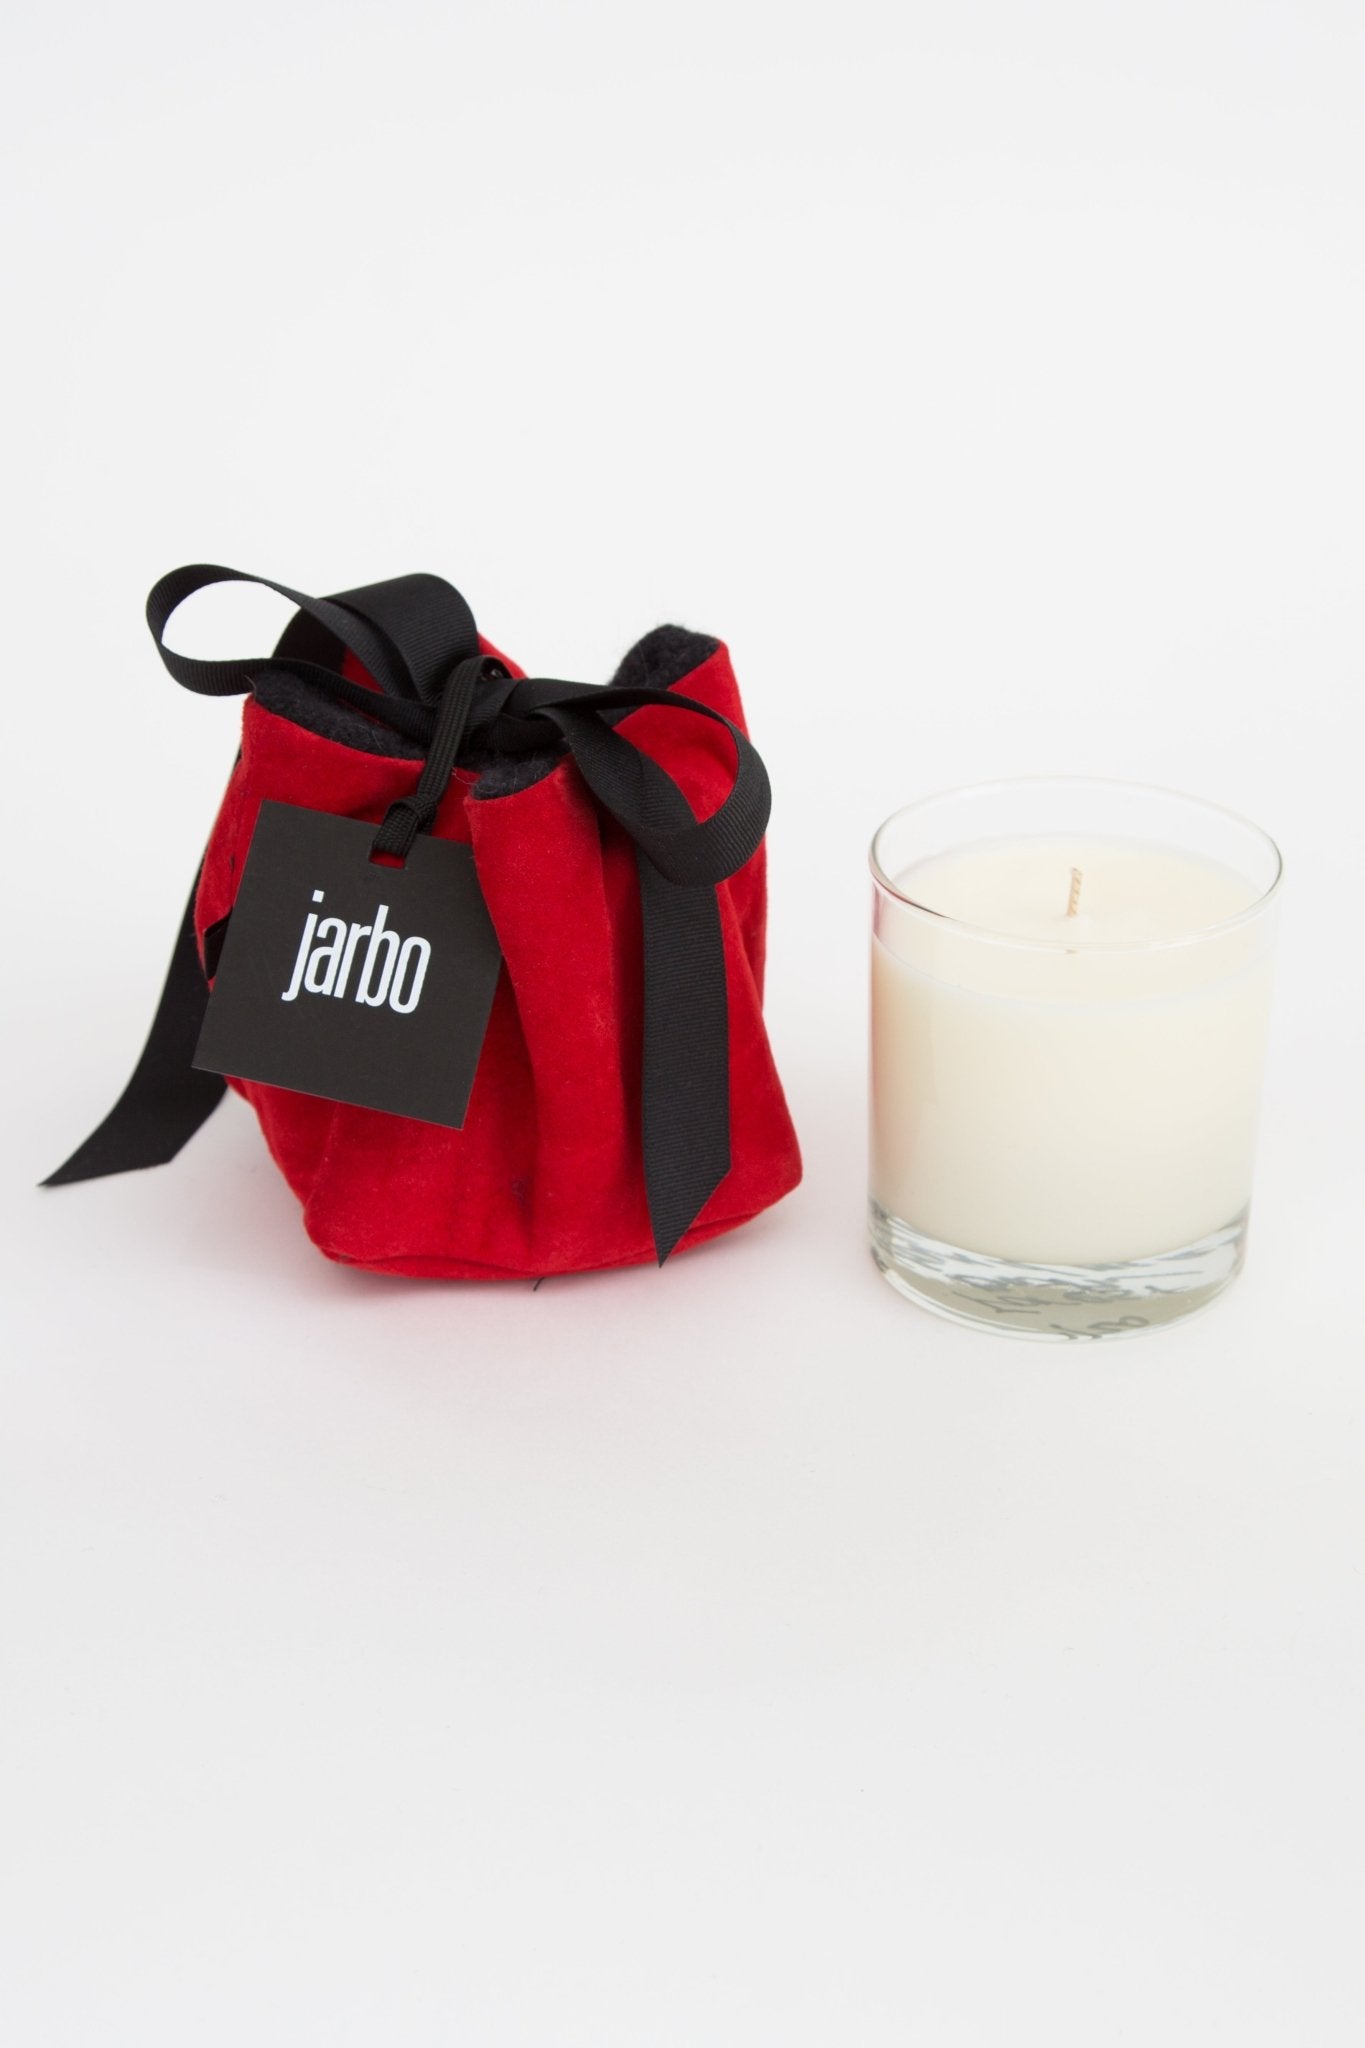 HAND-MADE SOY CANDLE - Jarbo